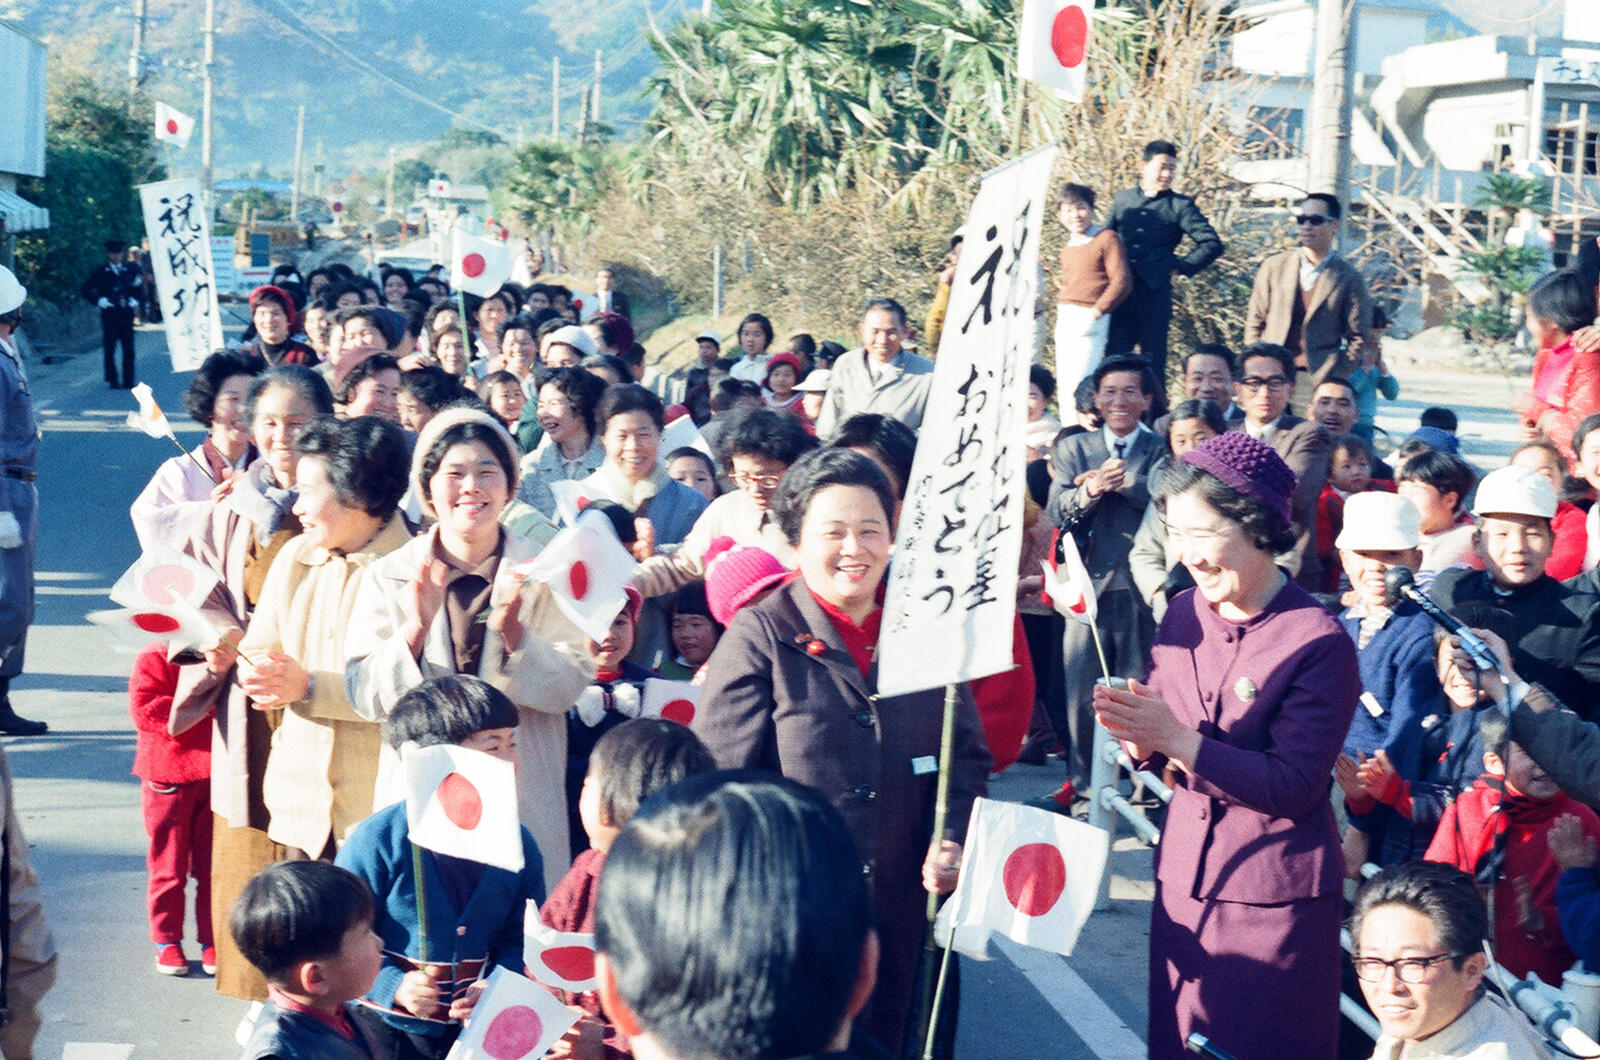 Residents of the Ohsumi peninsula line up with congratulatory flags upon the launch of Ohsumi